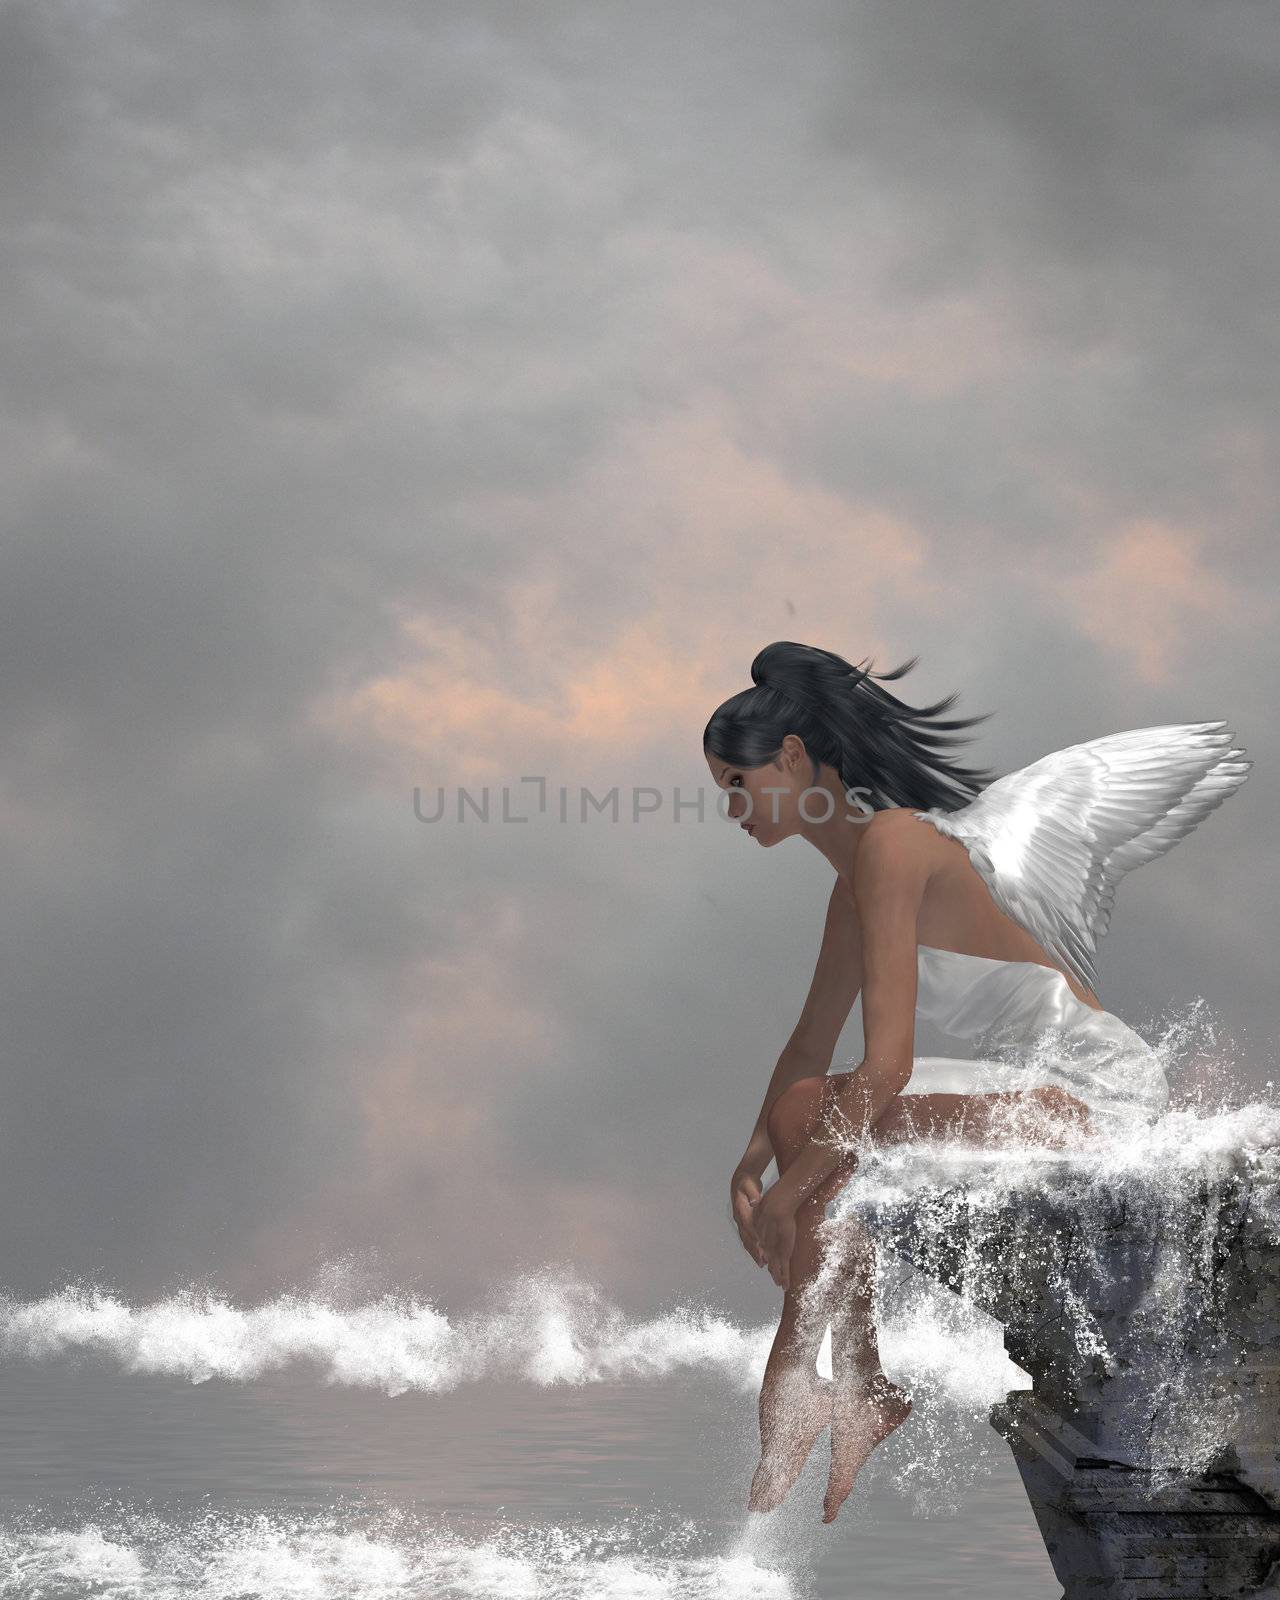 Angel sitting on a ledge waterfall in the ocean